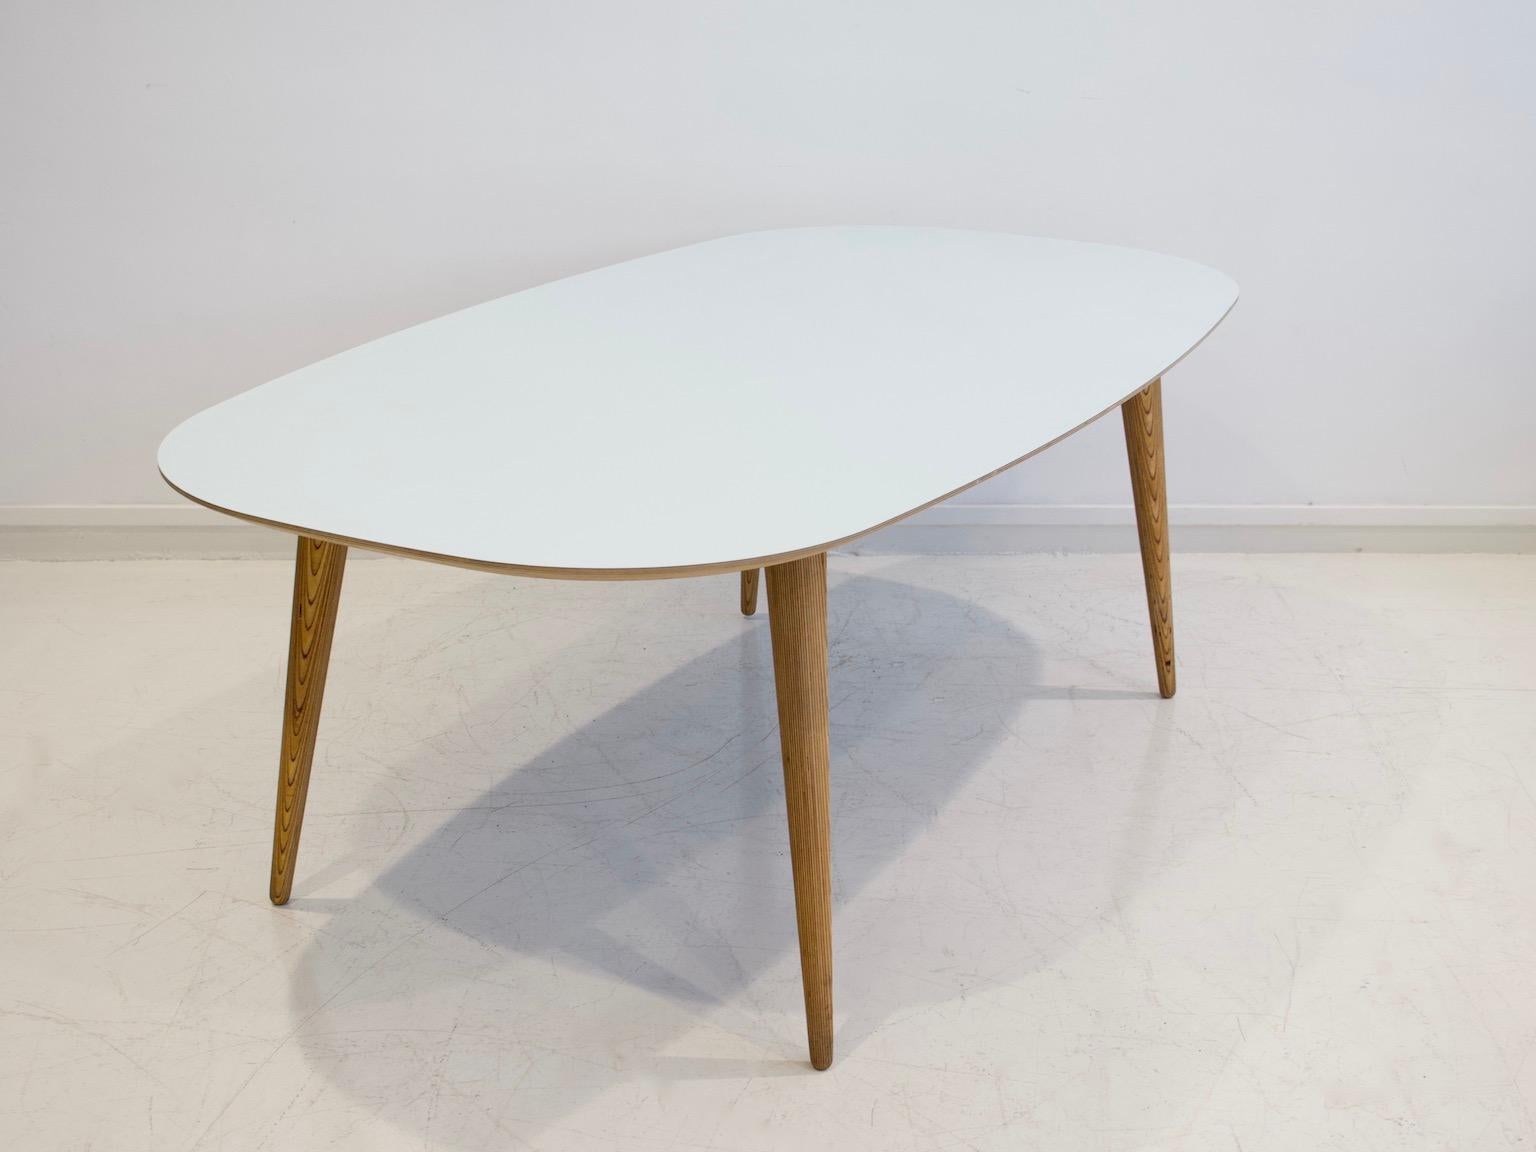 Dining table by master carpenter Lau Lauritsen, labeled under tabletop. Elliptical light blue color high-pressure laminate top, underside with black laminate. Conical oil-treated birch legs.